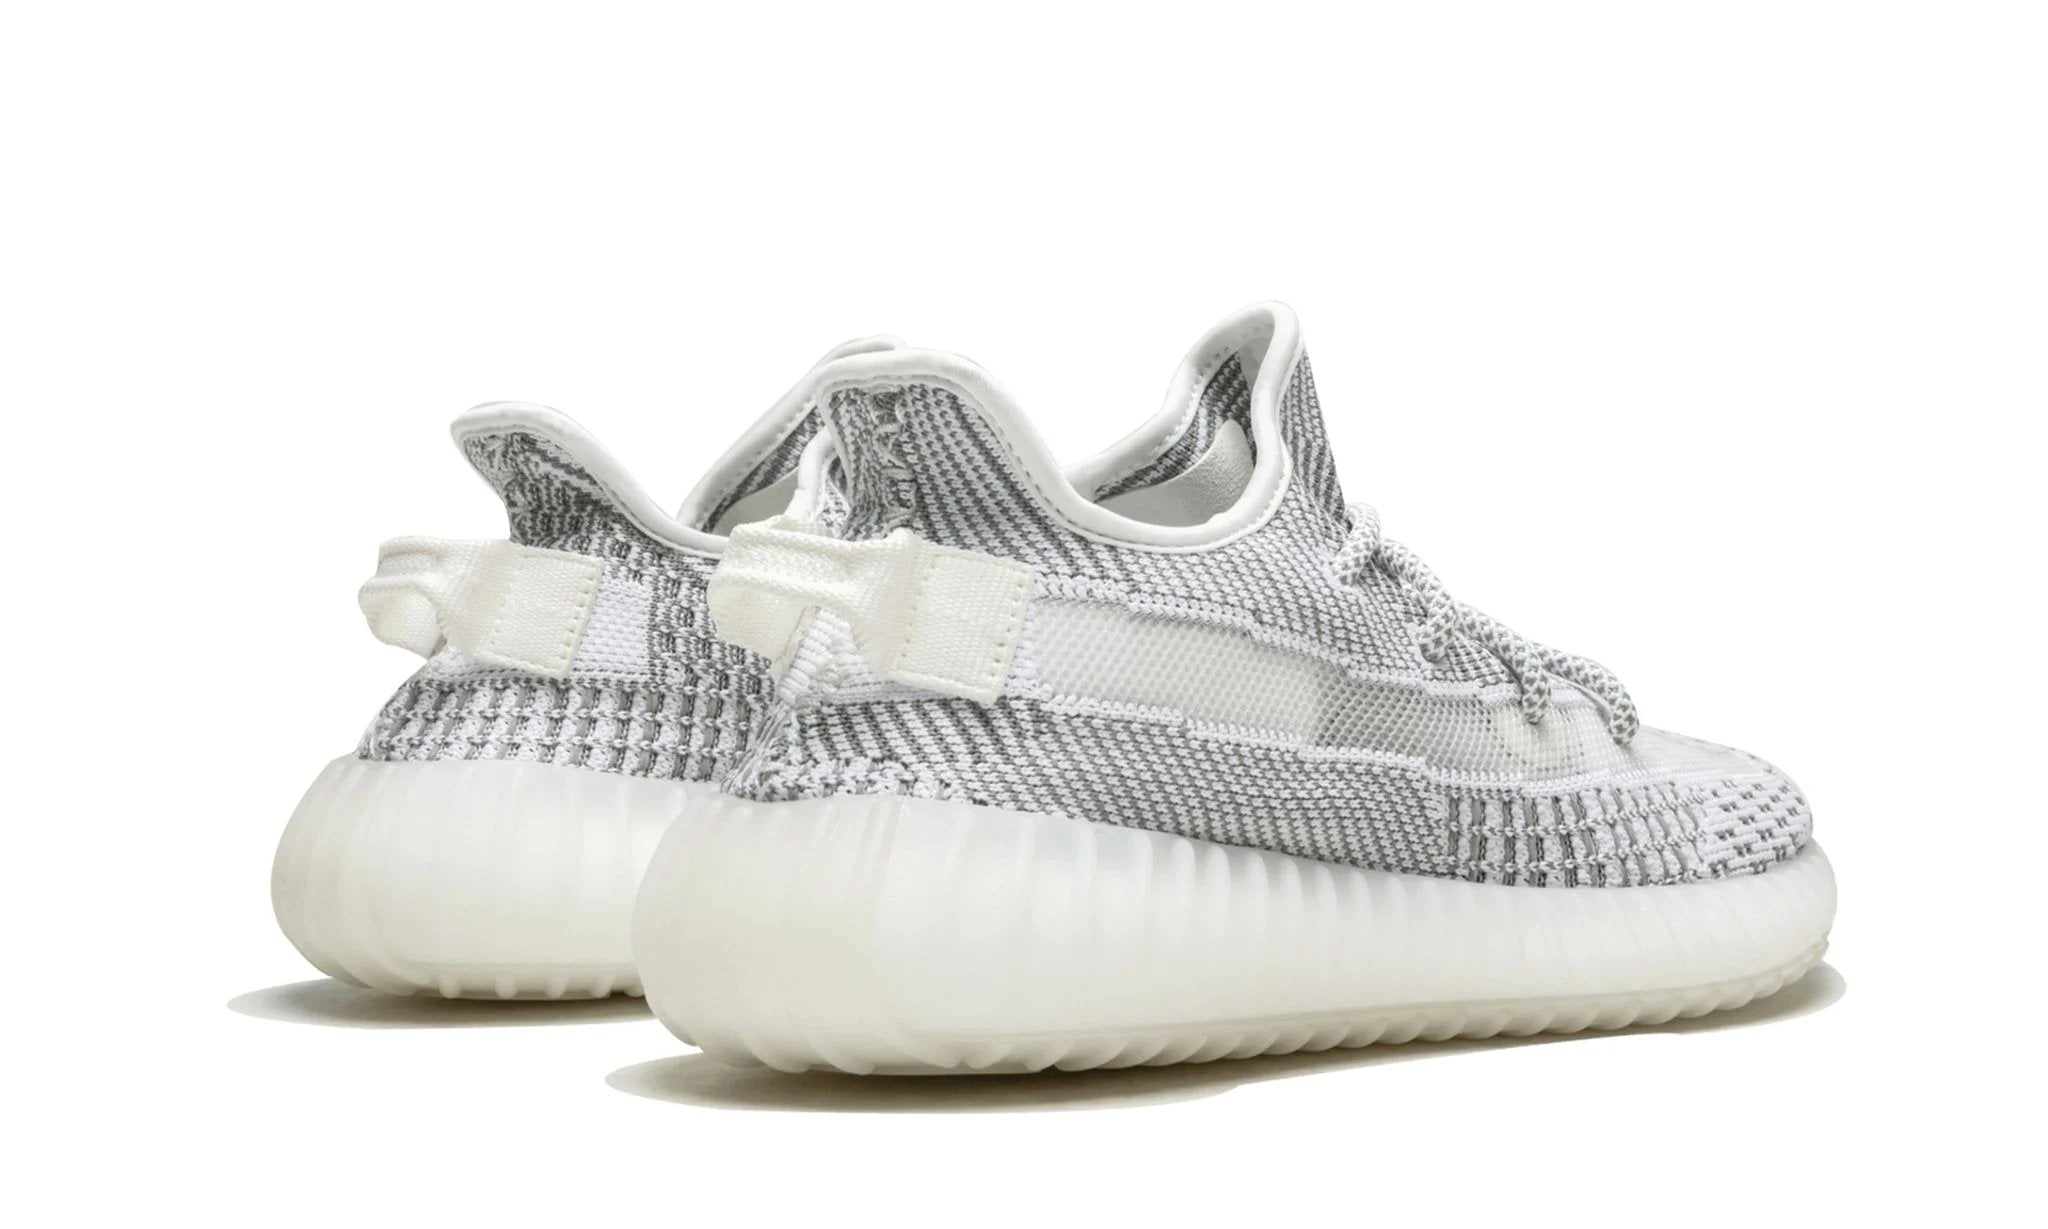 Yeezy Boost 350 V2 Static (Non-Reflective) - EF2905 - Sneakers